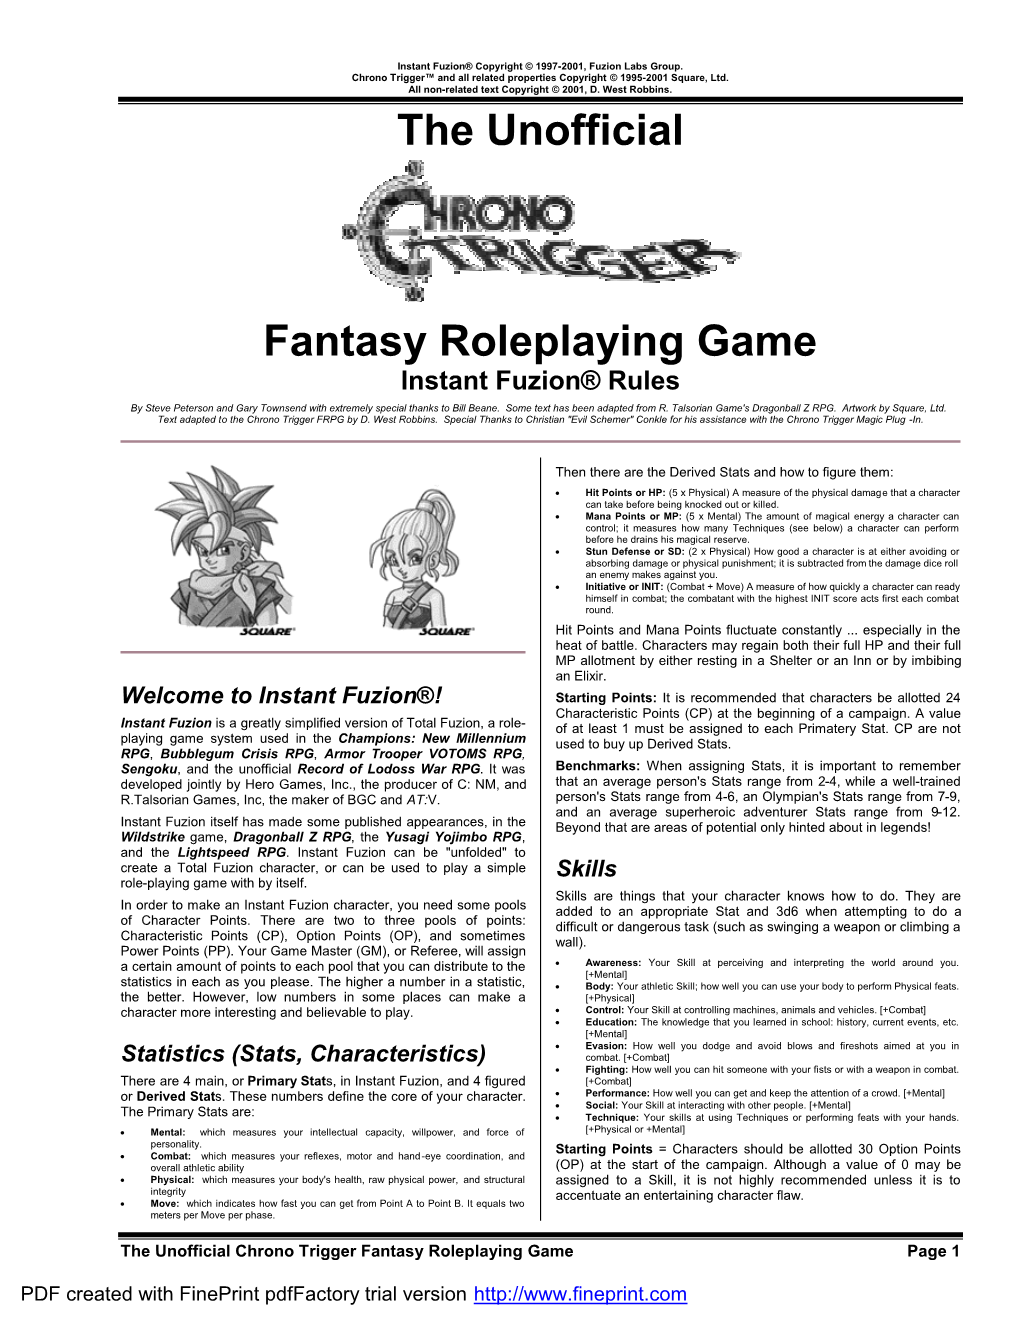 The Unofficial Fantasy Roleplaying Game Instant Fuzion® Rules